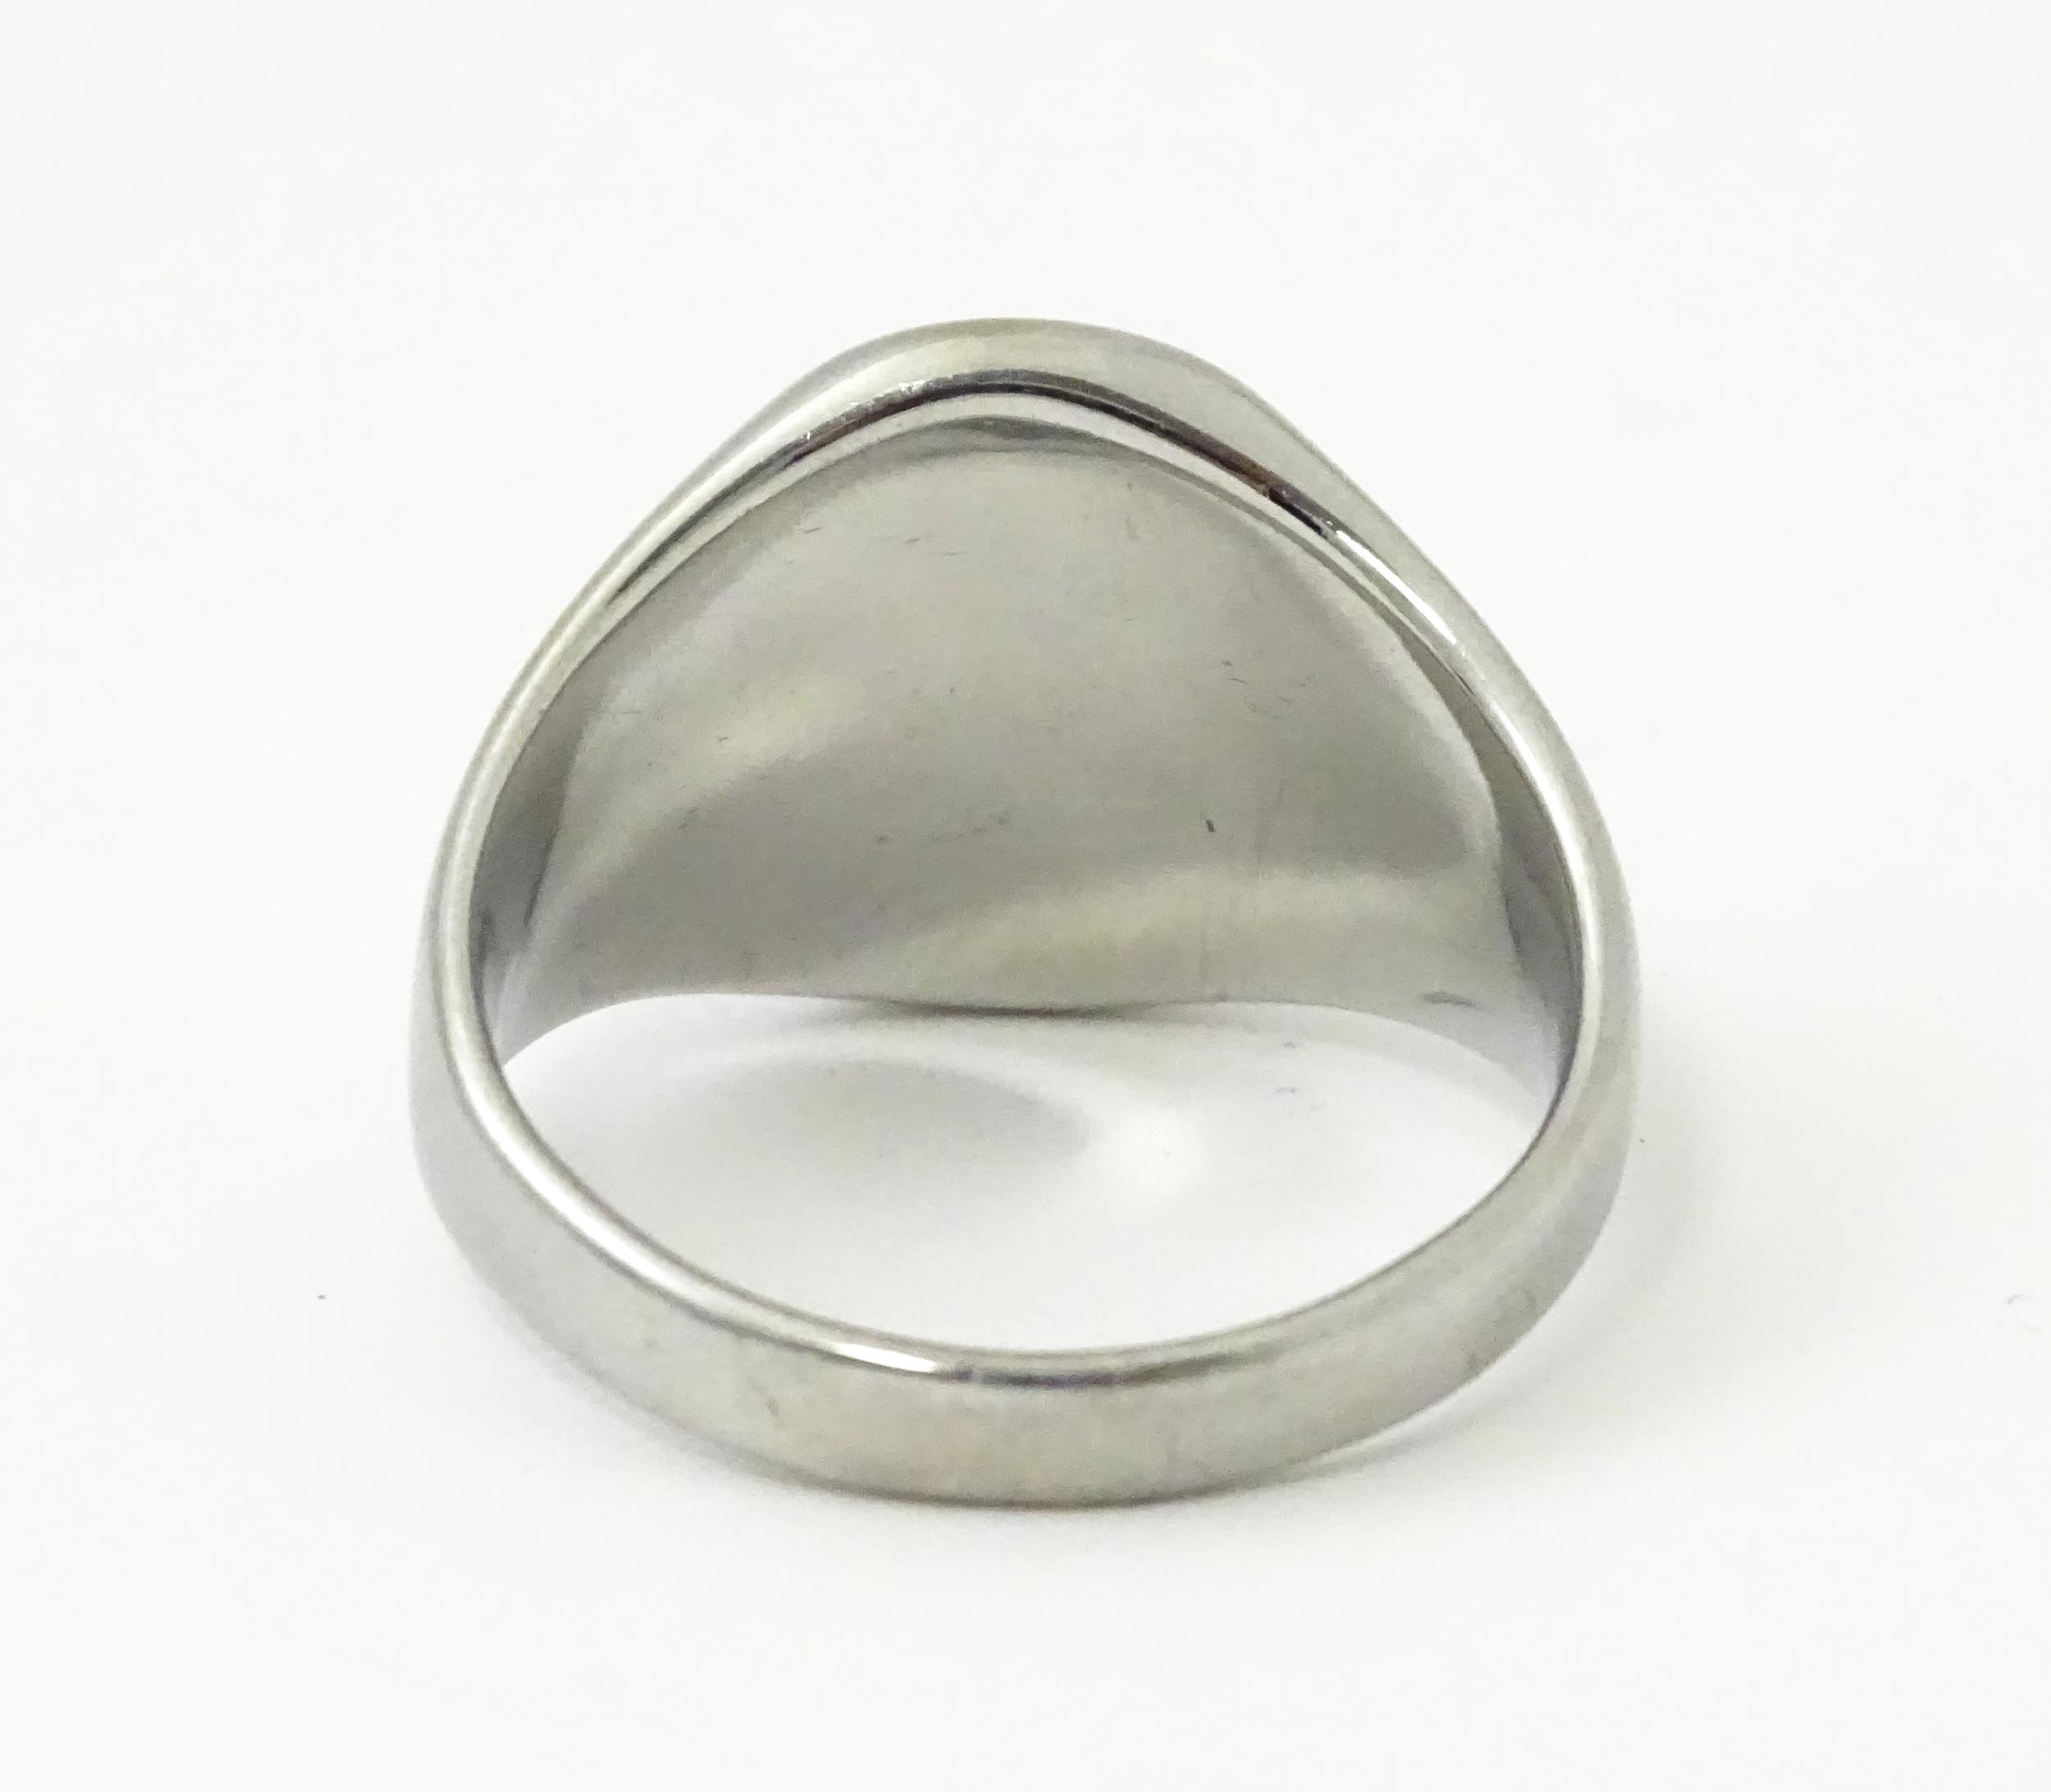 A Gentleman's white metal ring with engraved Christian symbolism depicting the Virgin Mary and - Image 6 of 6